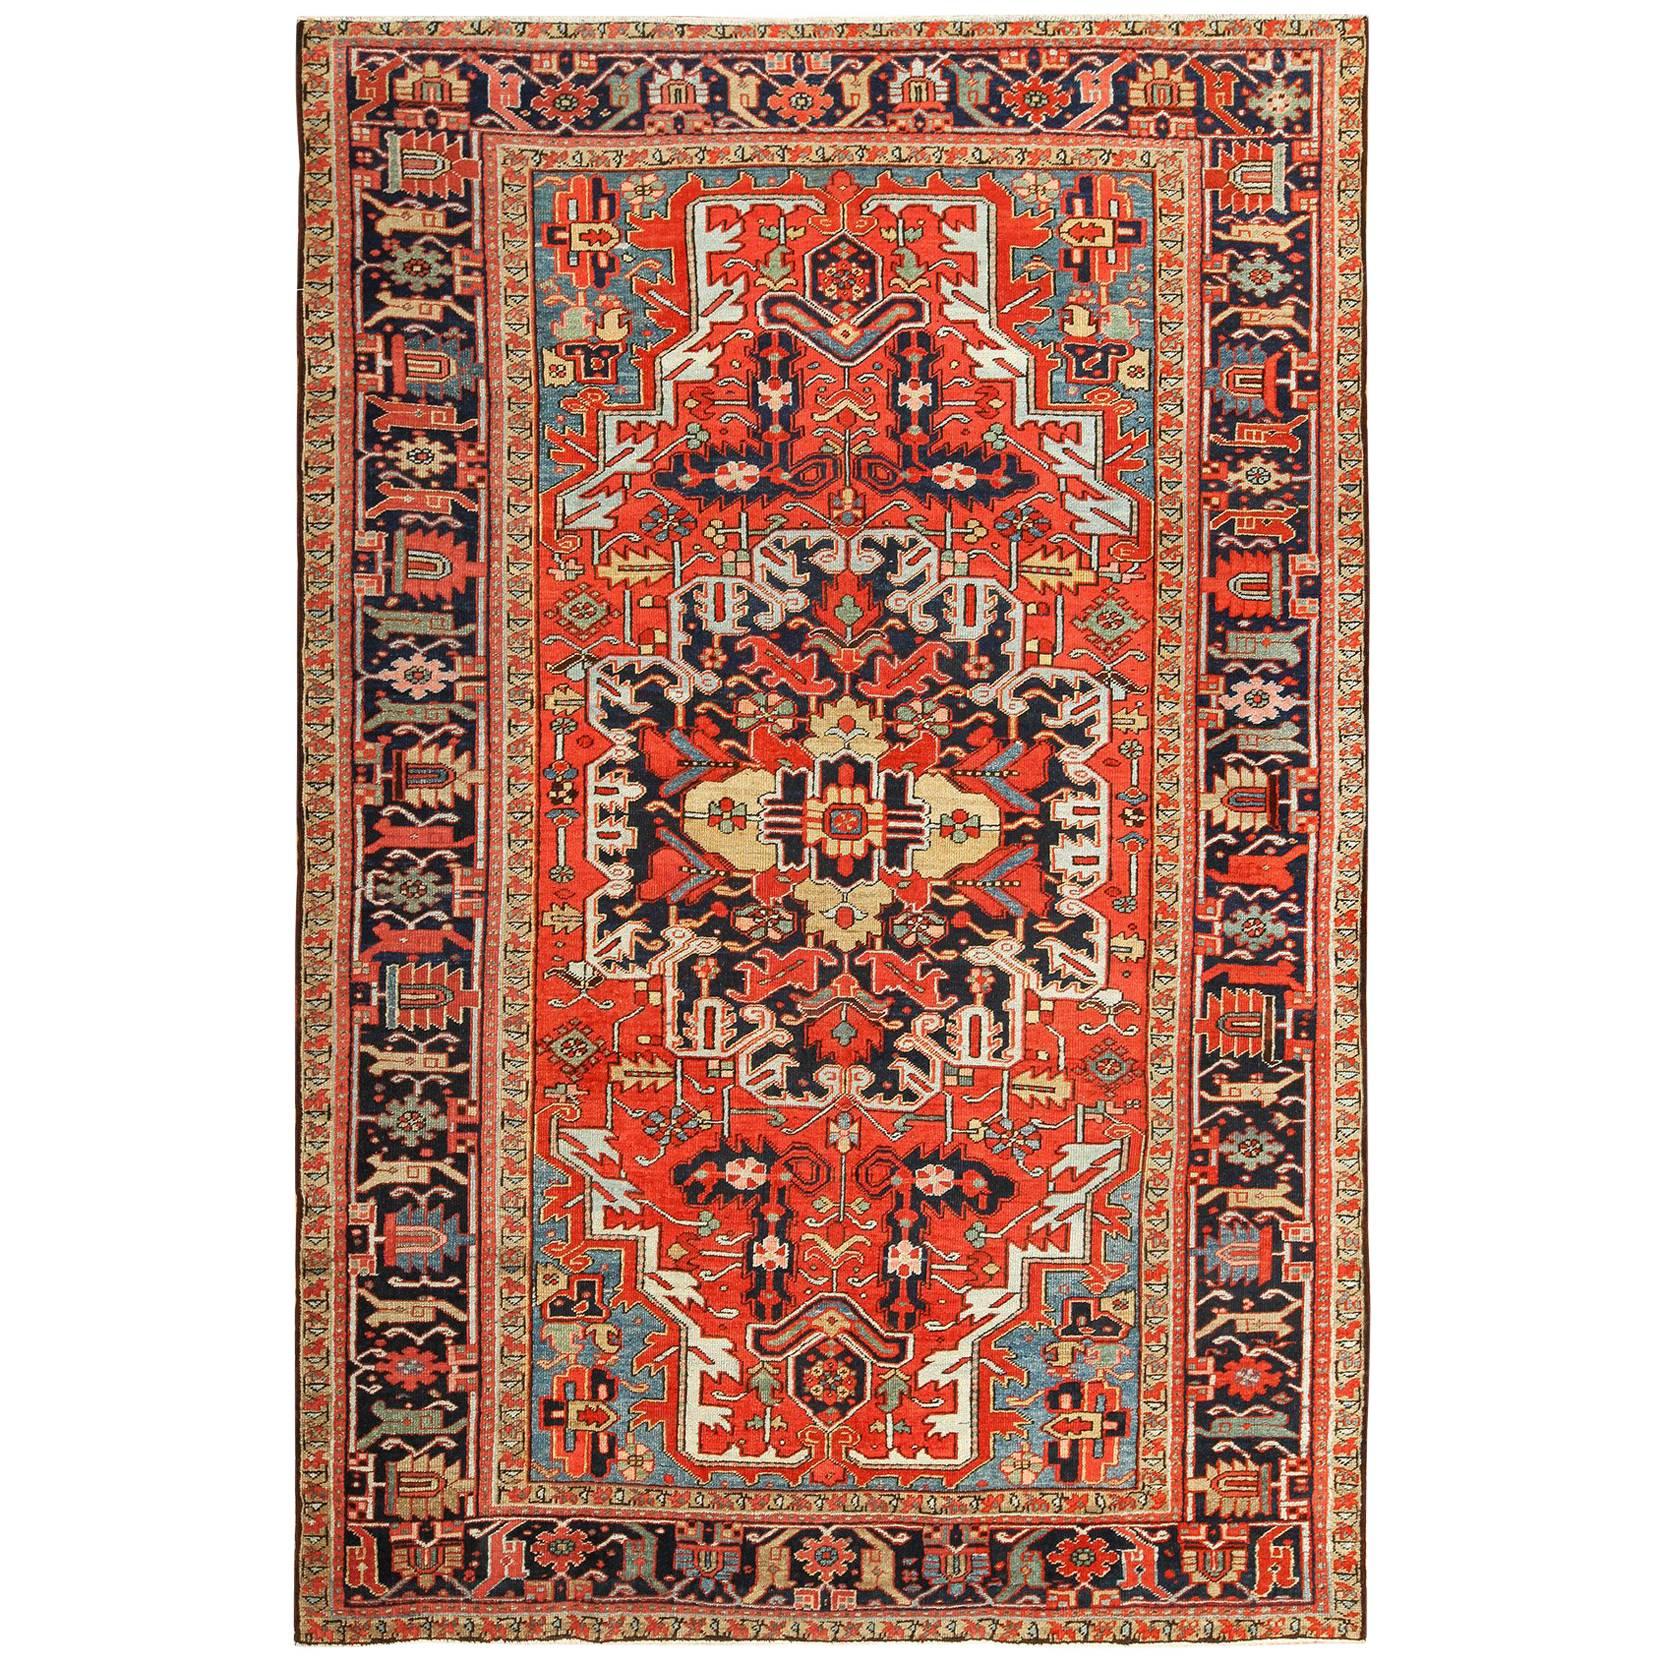 Antique Red Background Heriz Persian Rug. Size: 7 ft 2 in x 10 ft 10 in 